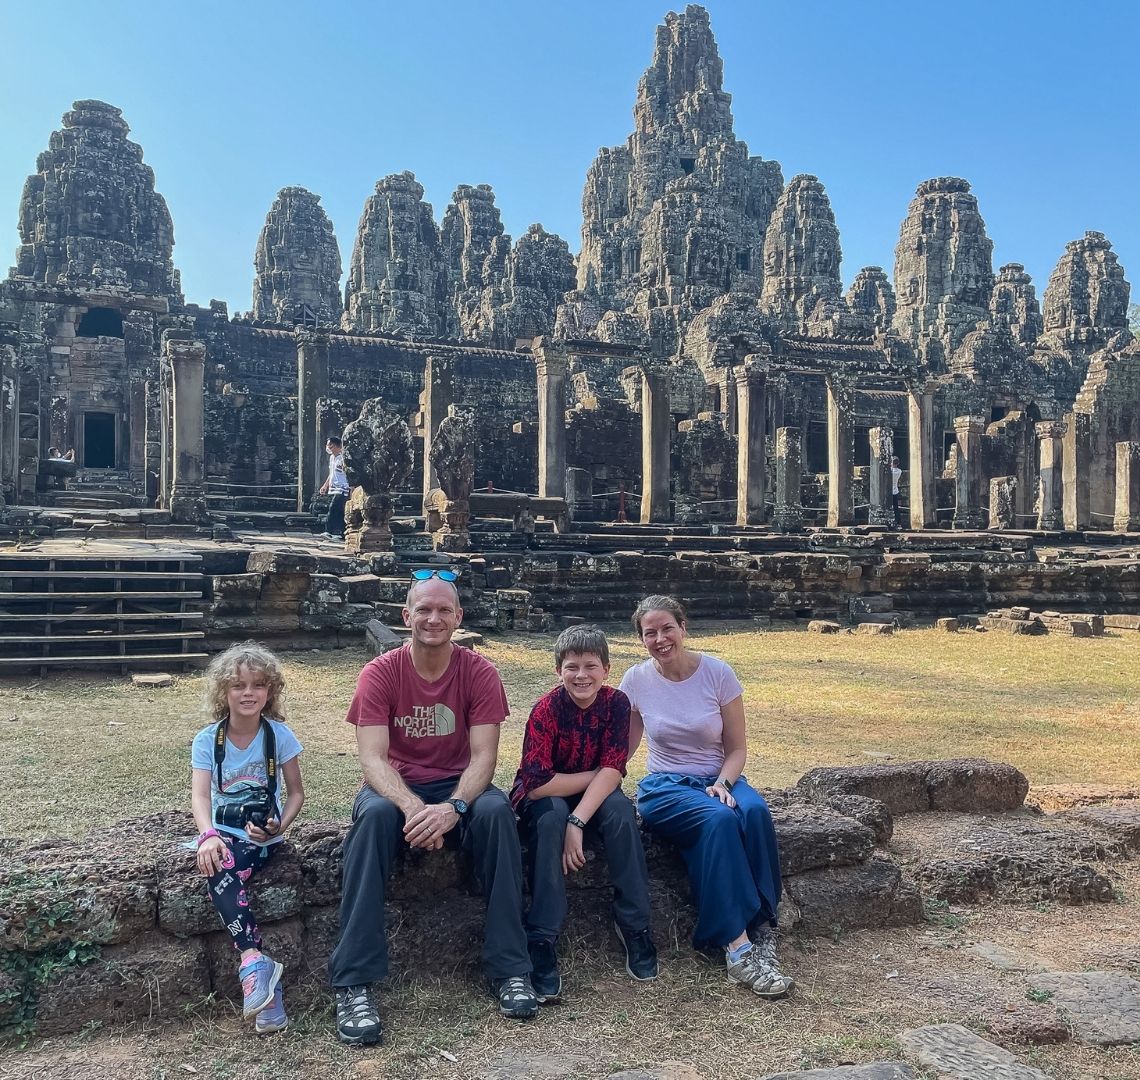 Thing2, Mr Wanderlust, Thing 1 and me sitting on a ruin wall in front of the ruins of Bayon temple